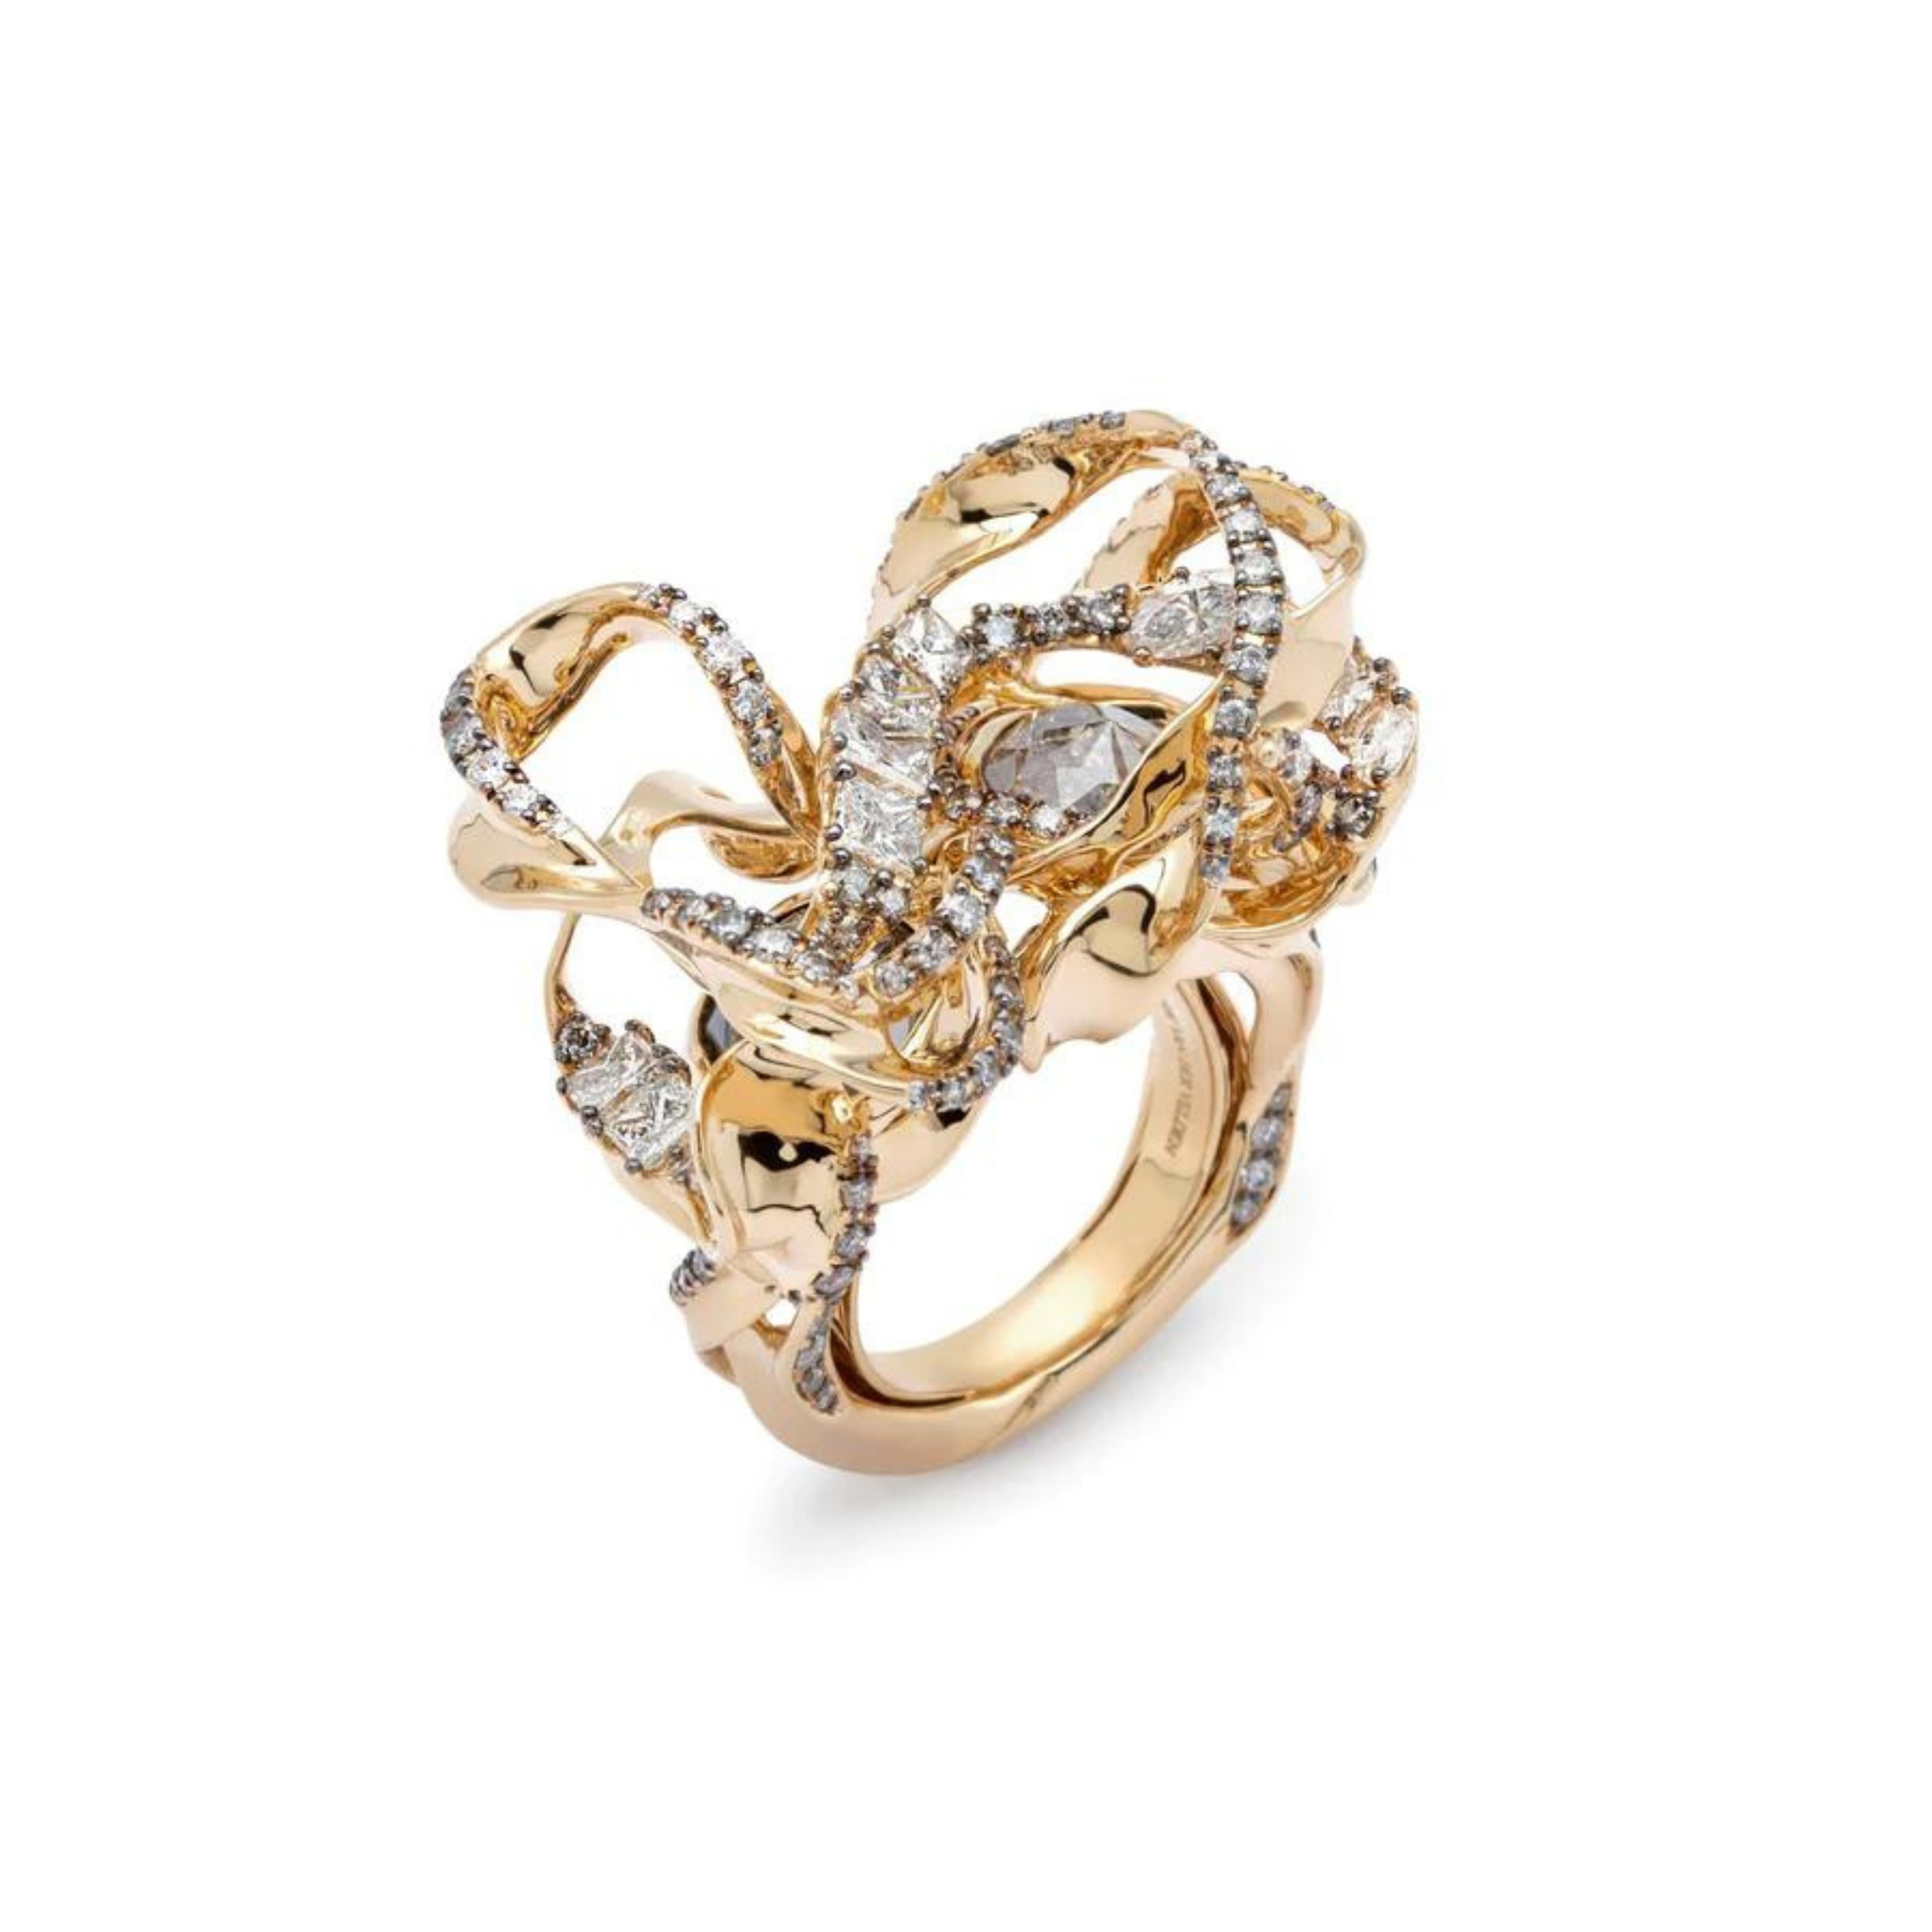 Bibi van der Velden Infinity Smoke Ring with Diamonds. One-of-a-kind infinity ring is crafted in 18K yellow gold and set with white diamonds and gray diamonds. Its center features two rose-cut salt and pepper diamonds framed by graduated, organic cuts that shine like polished smoke. Side view.